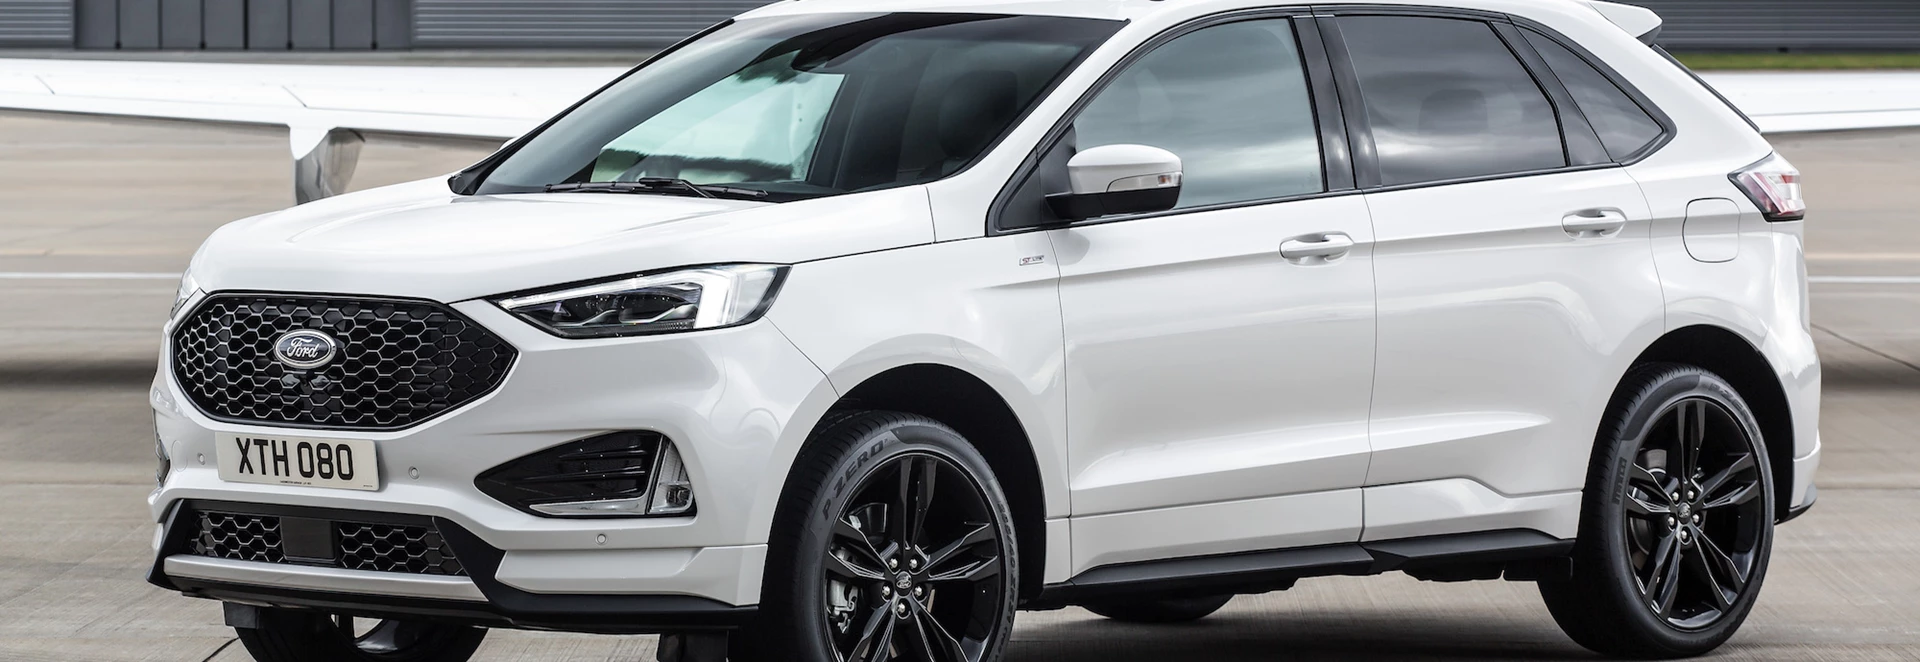 Ford reveals second-generation Edge SUV